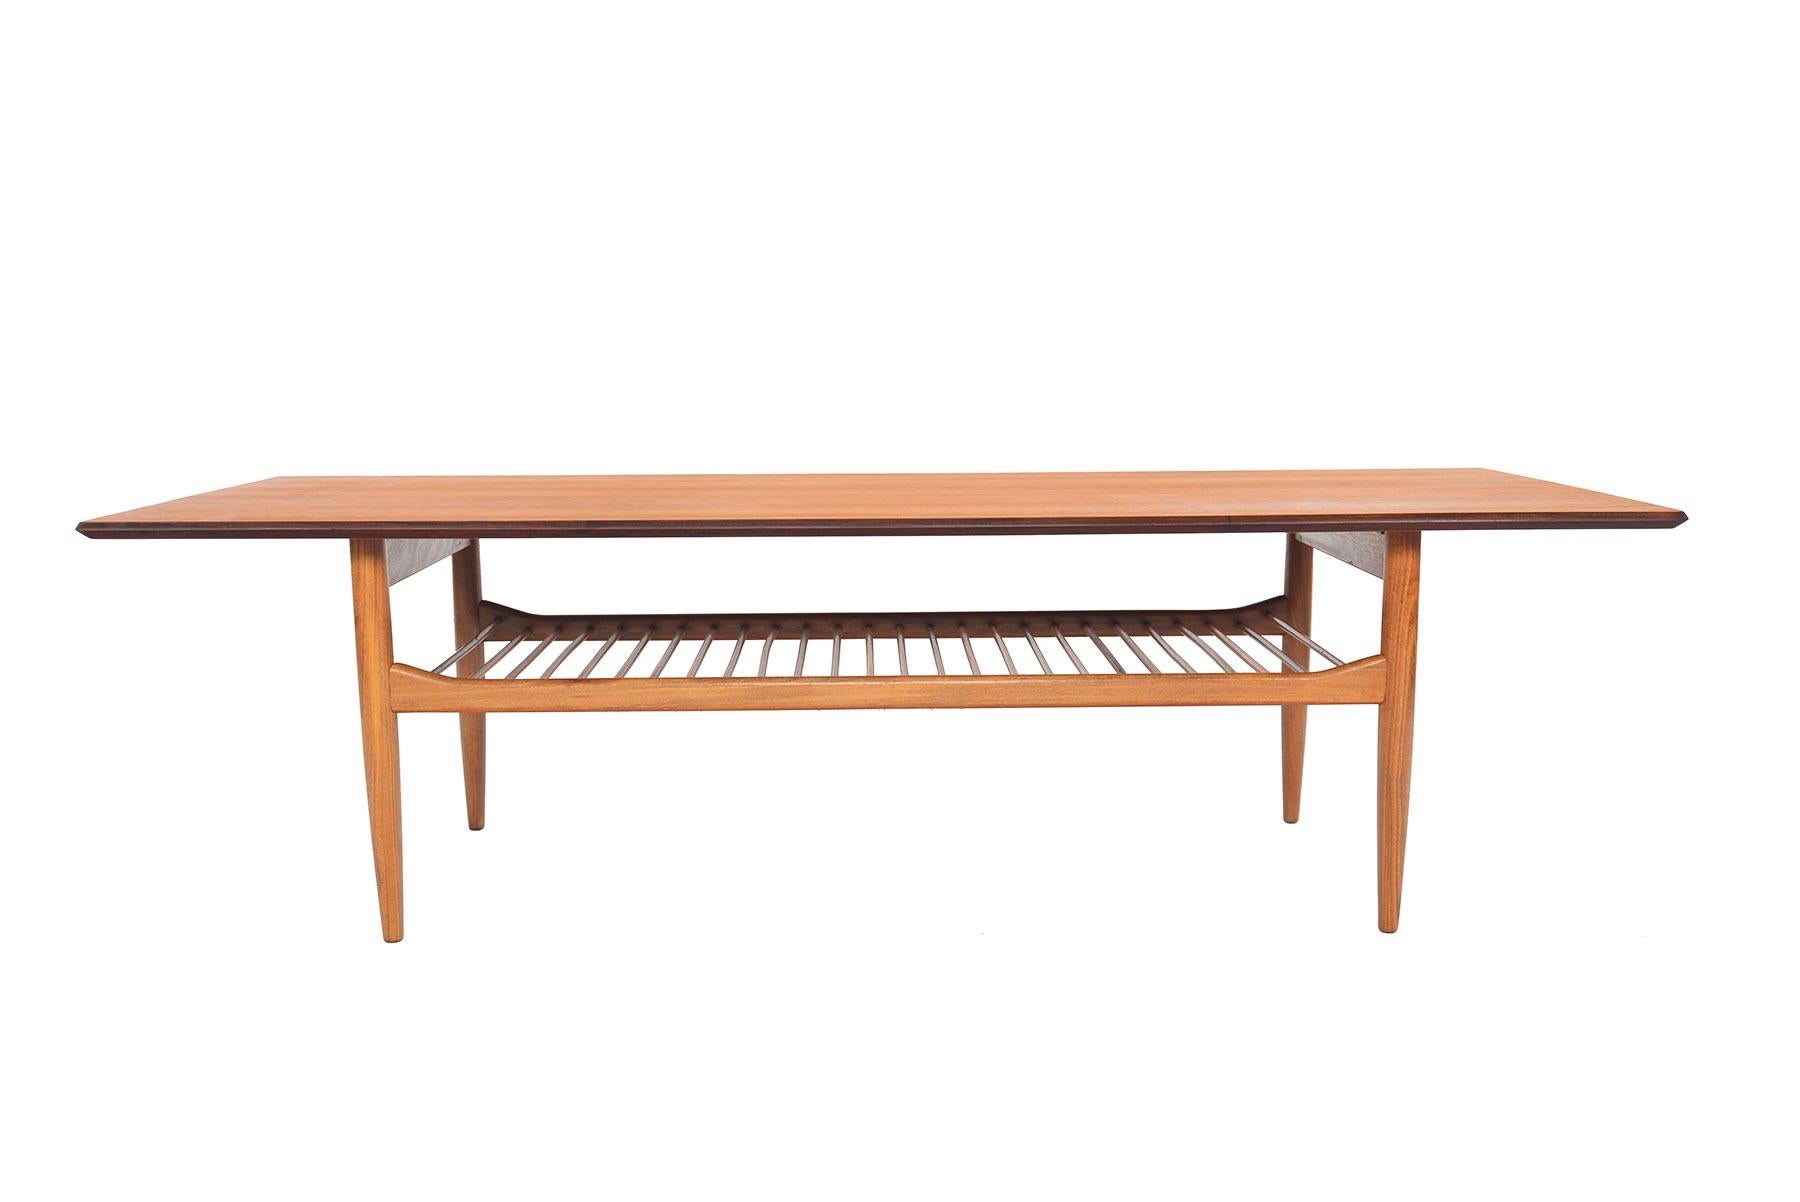 Designed by Ib Kofod- Larsen for G Plan’s Danish range in the 1960s, perfectly detailed coffee table is crafted in teak with clean lines. A lower doweled rack provides storage. In excellent original condition.

 